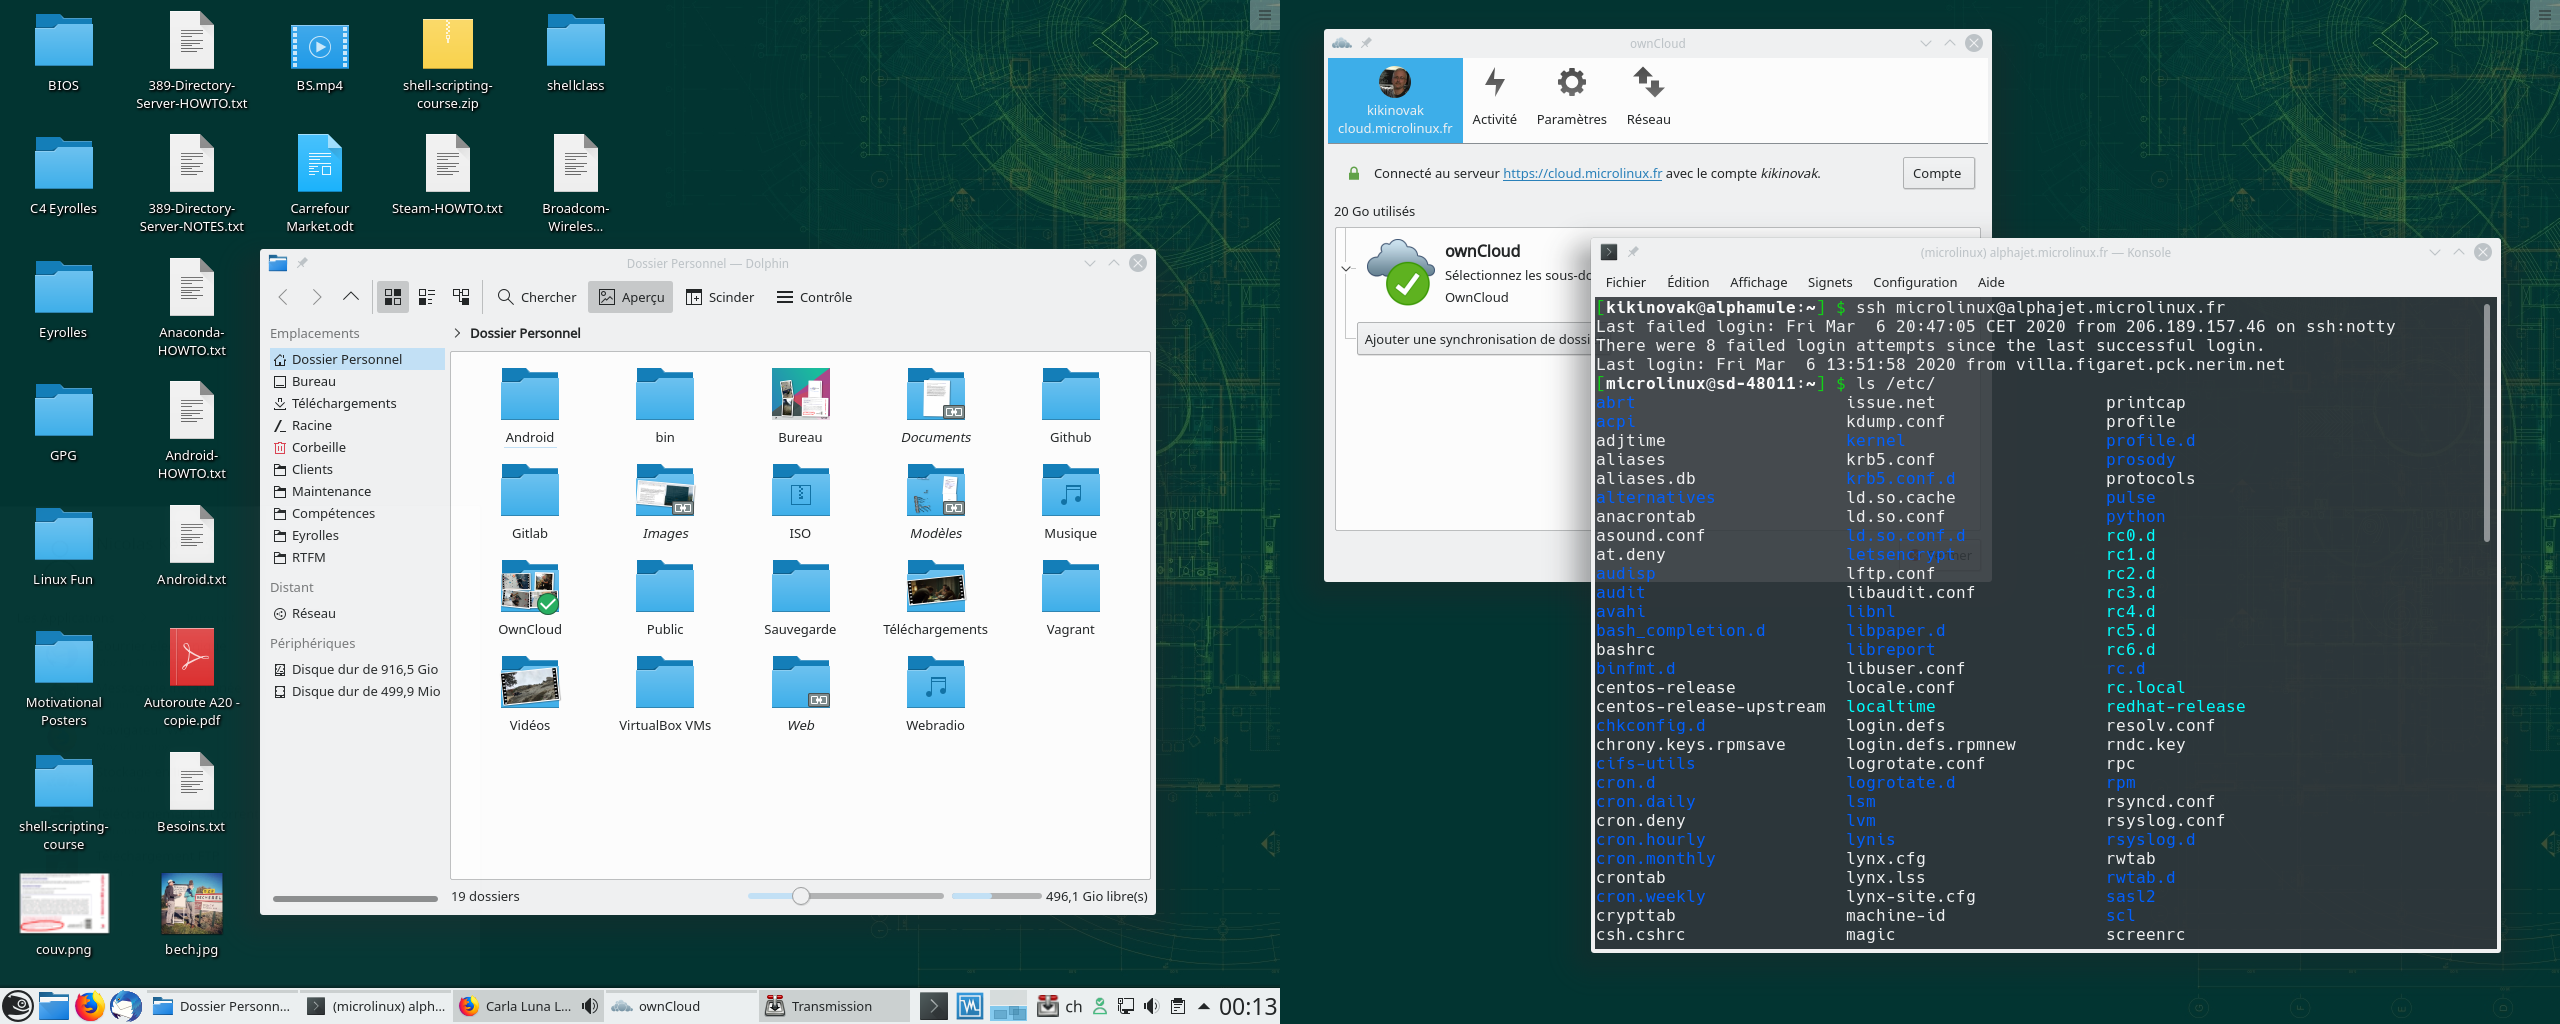 OpenSUSE Leap